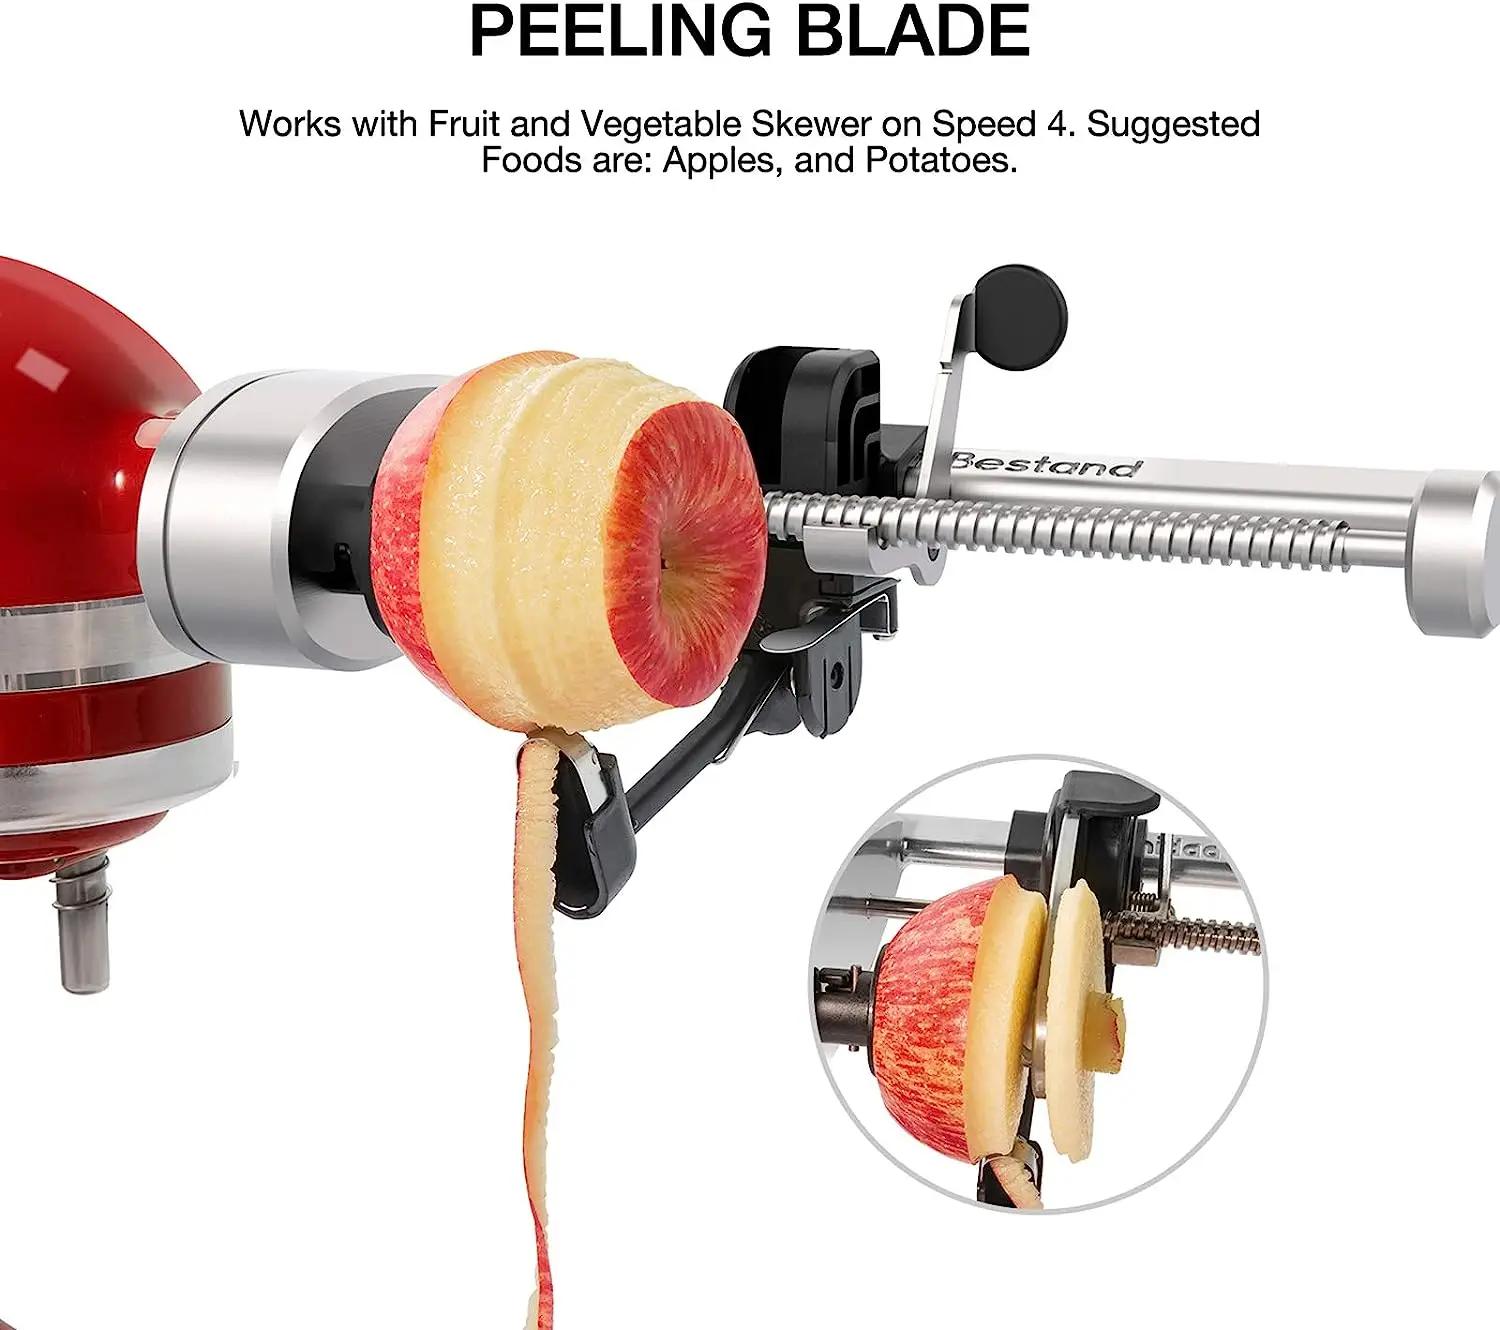 https://ae01.alicdn.com/kf/Sbcbec2c97ff0403e8fa0c7f380aa818ea/Spiralizer-Attachment-Compatible-with-KitchenAid-Stand-Mixer-Comes-with-Peel-Core-and-Slice-Not-KitchenAid-Brand.jpg